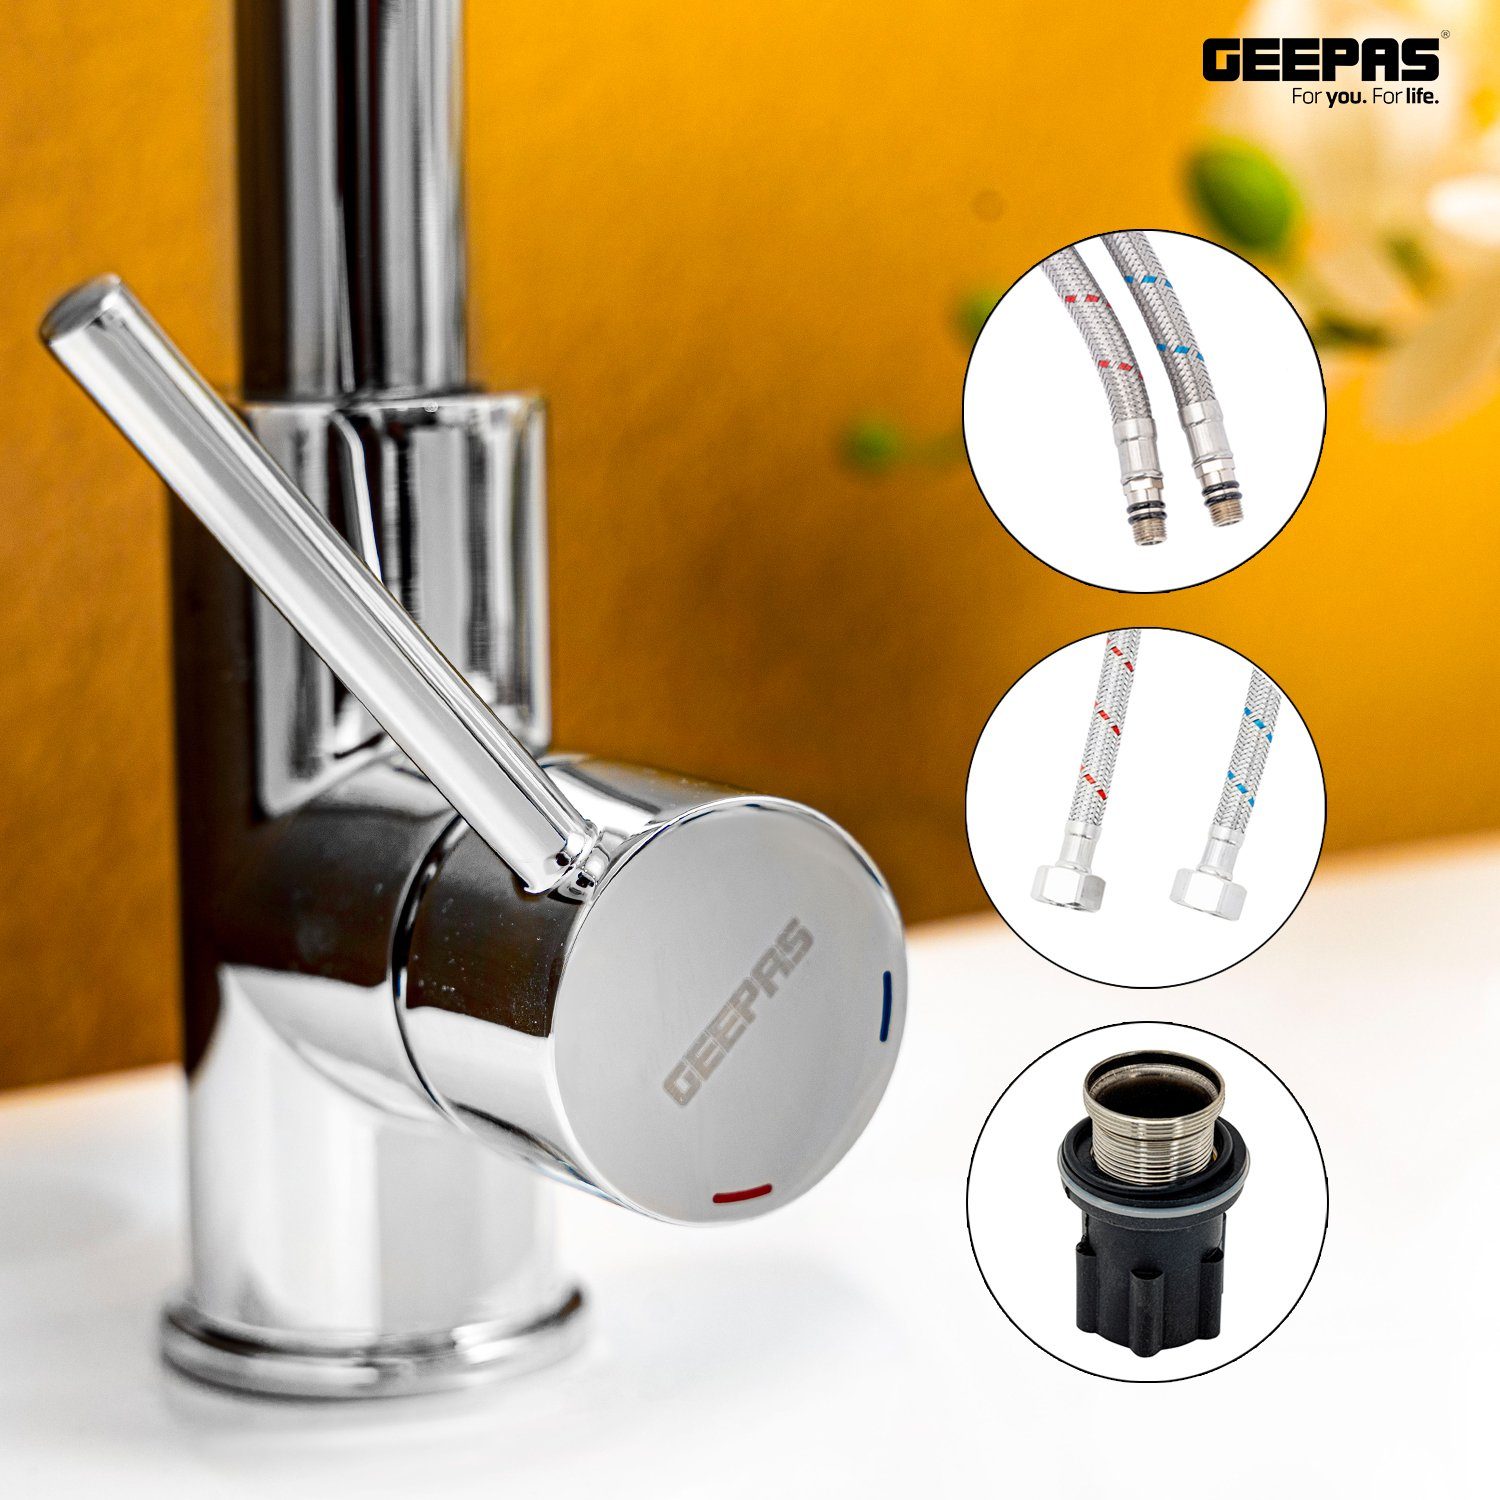 Kitchen Sink Tap Stainless Steel - GSW61010 Kitchen Fixtures Geepas | For you. For life. 